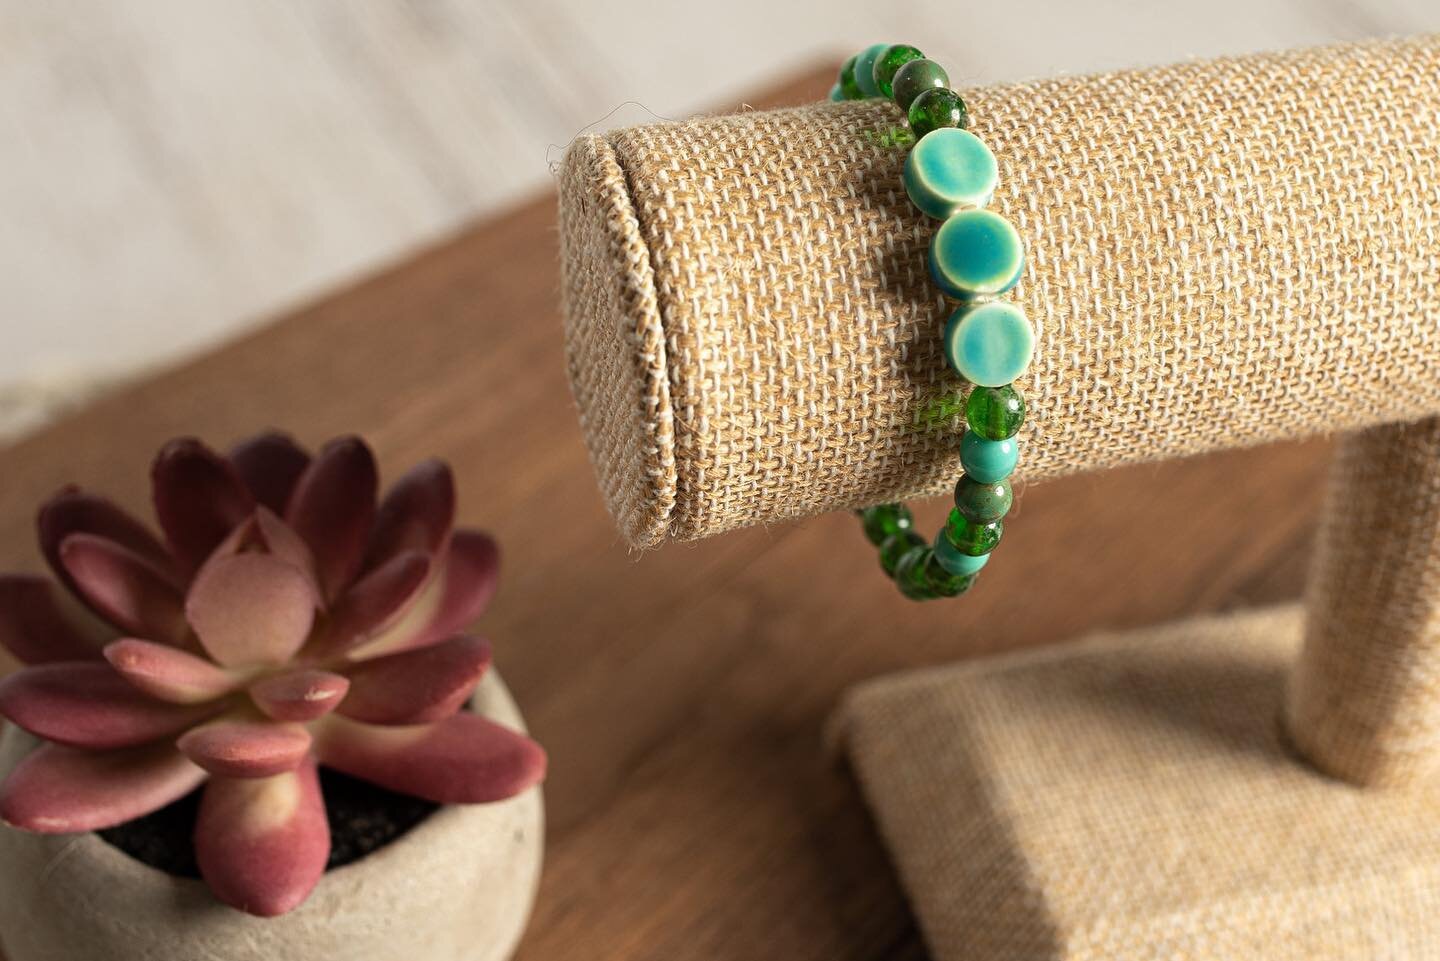 Pretty and bright, this bracelet is perfect to wear through summer.